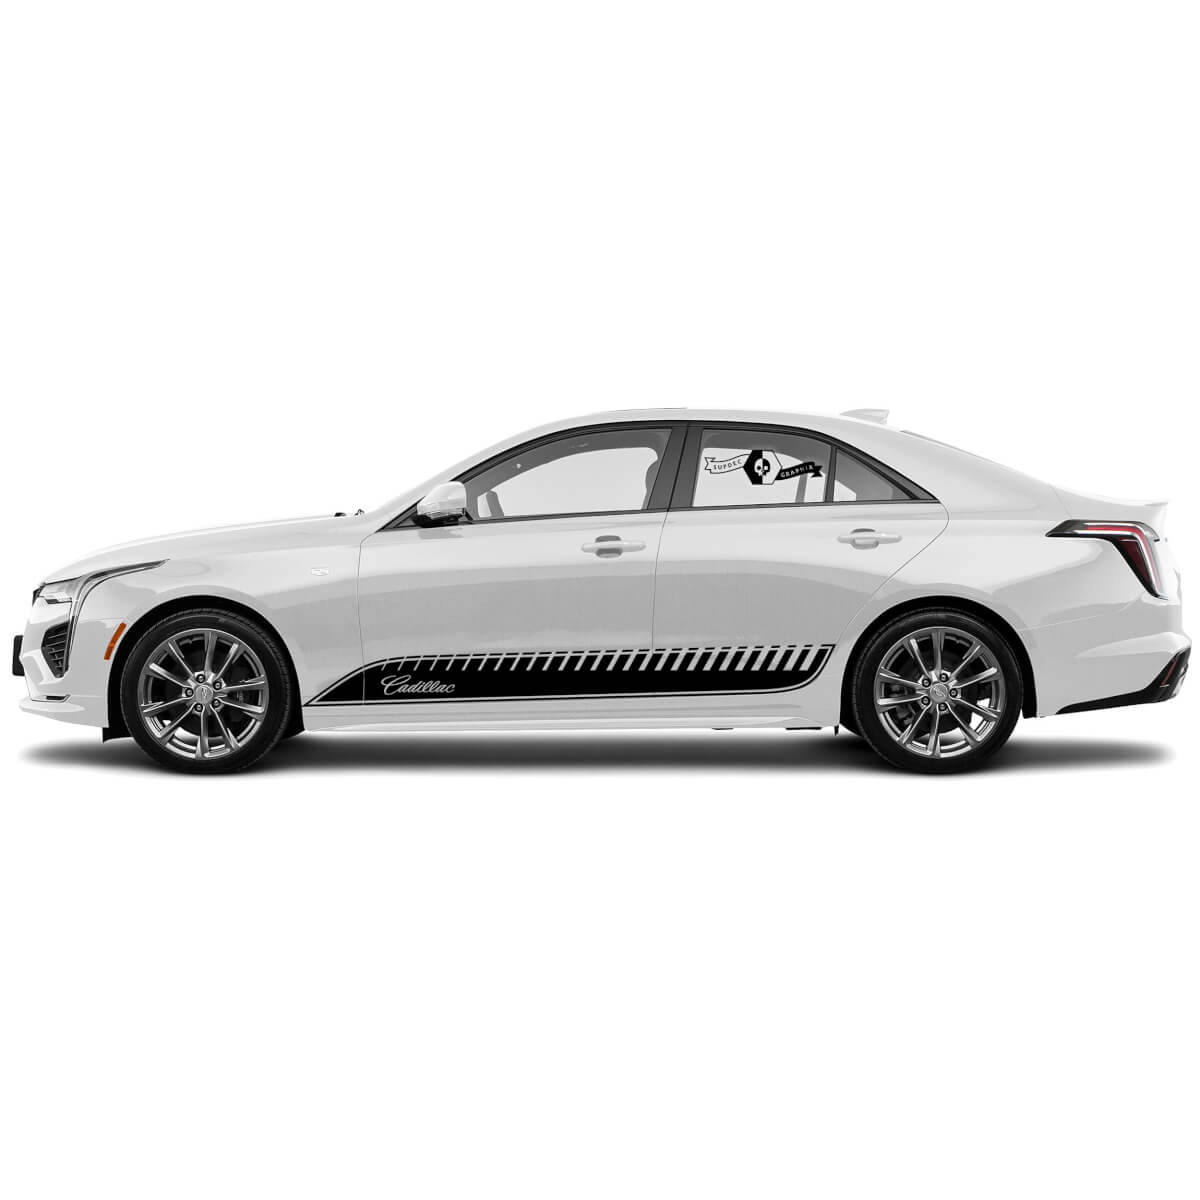 2 New Decal Sticker Stylish Doors Accent Trim Boundary Lines Pockmarked Wrap vinyl Decal for Cadillac CT4